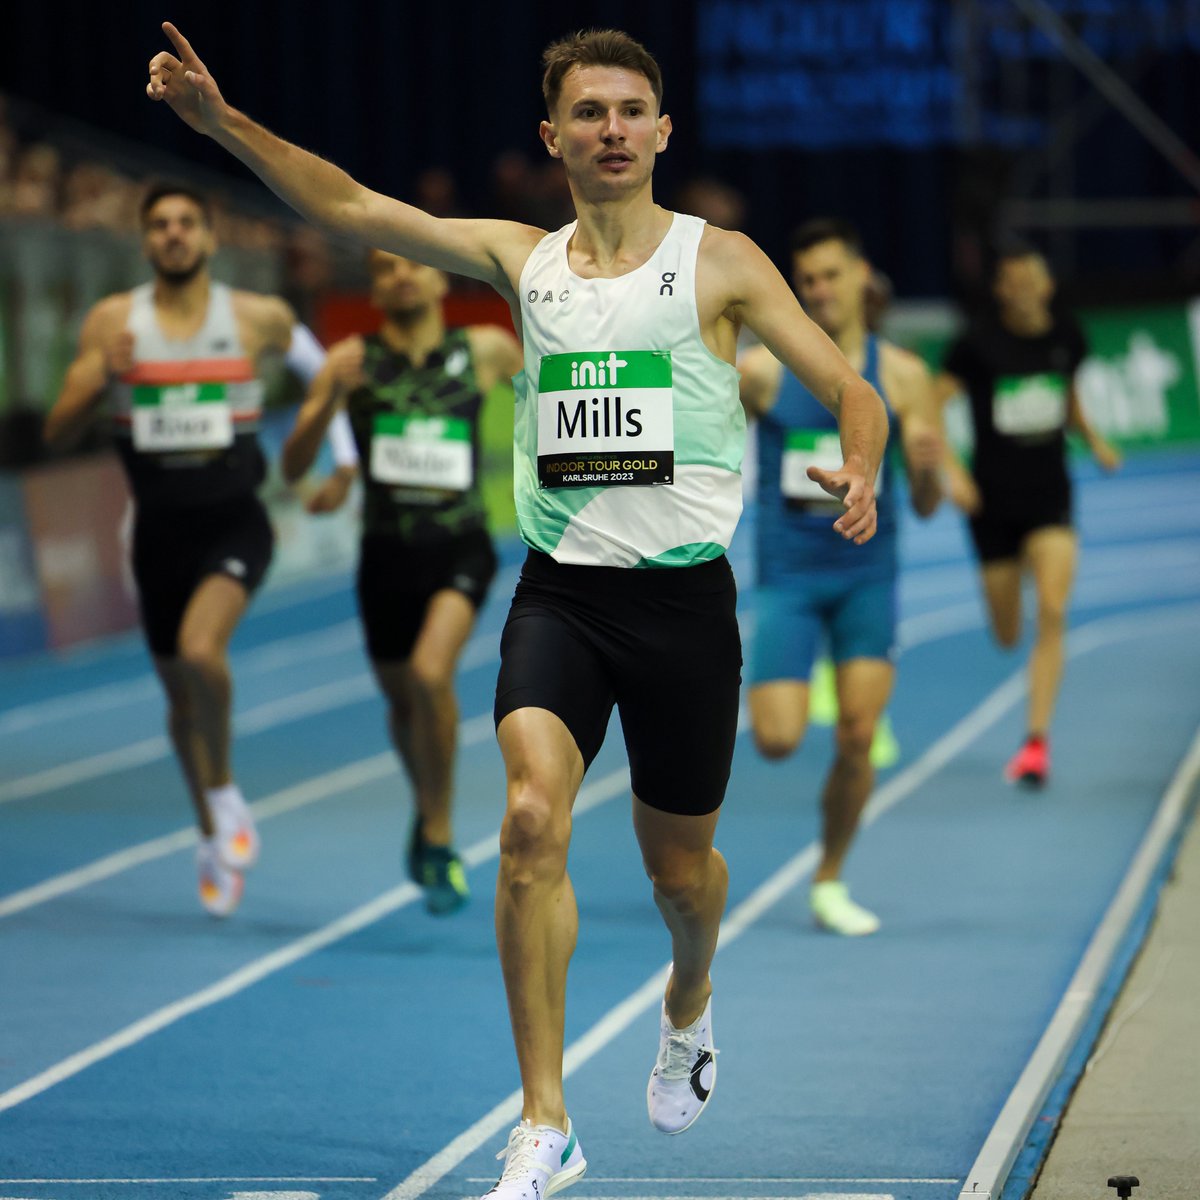 🇬🇧's @georgemills800 wins the men's 1500m by a huge margin in a world-leading 3:35.88 😎 #WorldIndoorTour